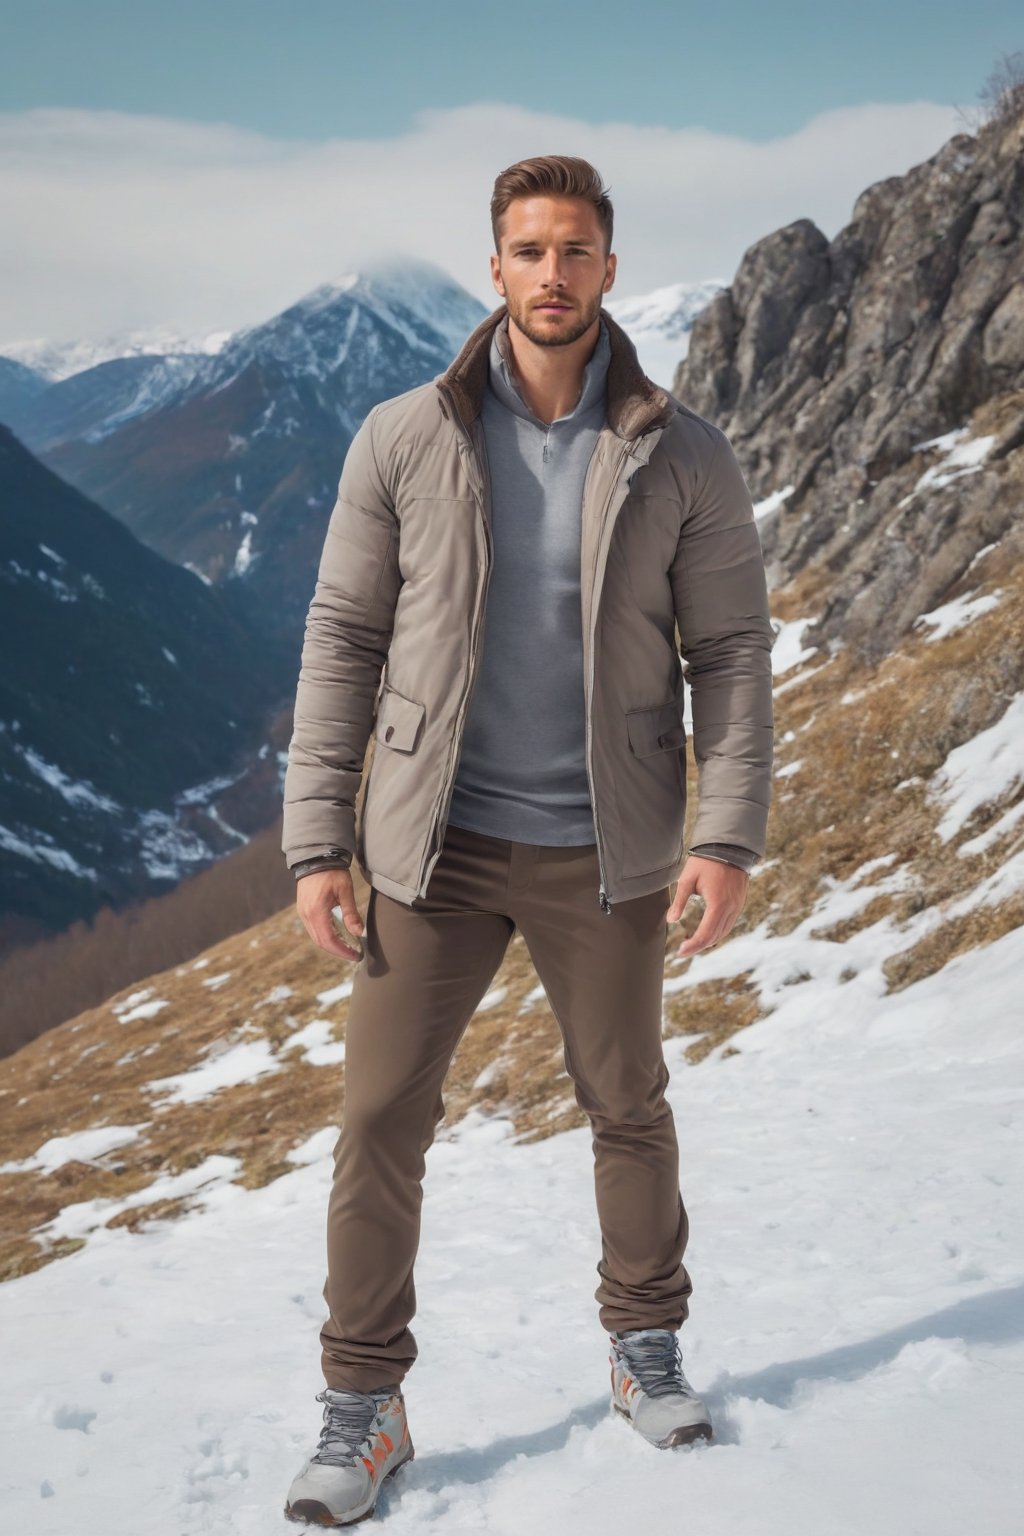 Imagine the following scene.

A handsome man standing on snow mountain.

The man has his legs open and his hands extended upwards.

His gaze lowers, looking at the floor.

The man is from Romania, muscular, 25yo. Very light brown hair, with golden highlights.

Wear sports shorts, sports shoes, and a sports jacket.

The shot is full body. best quality, 8K, high resolution, masterpiece, HD, perfect proportions, perfect hands.